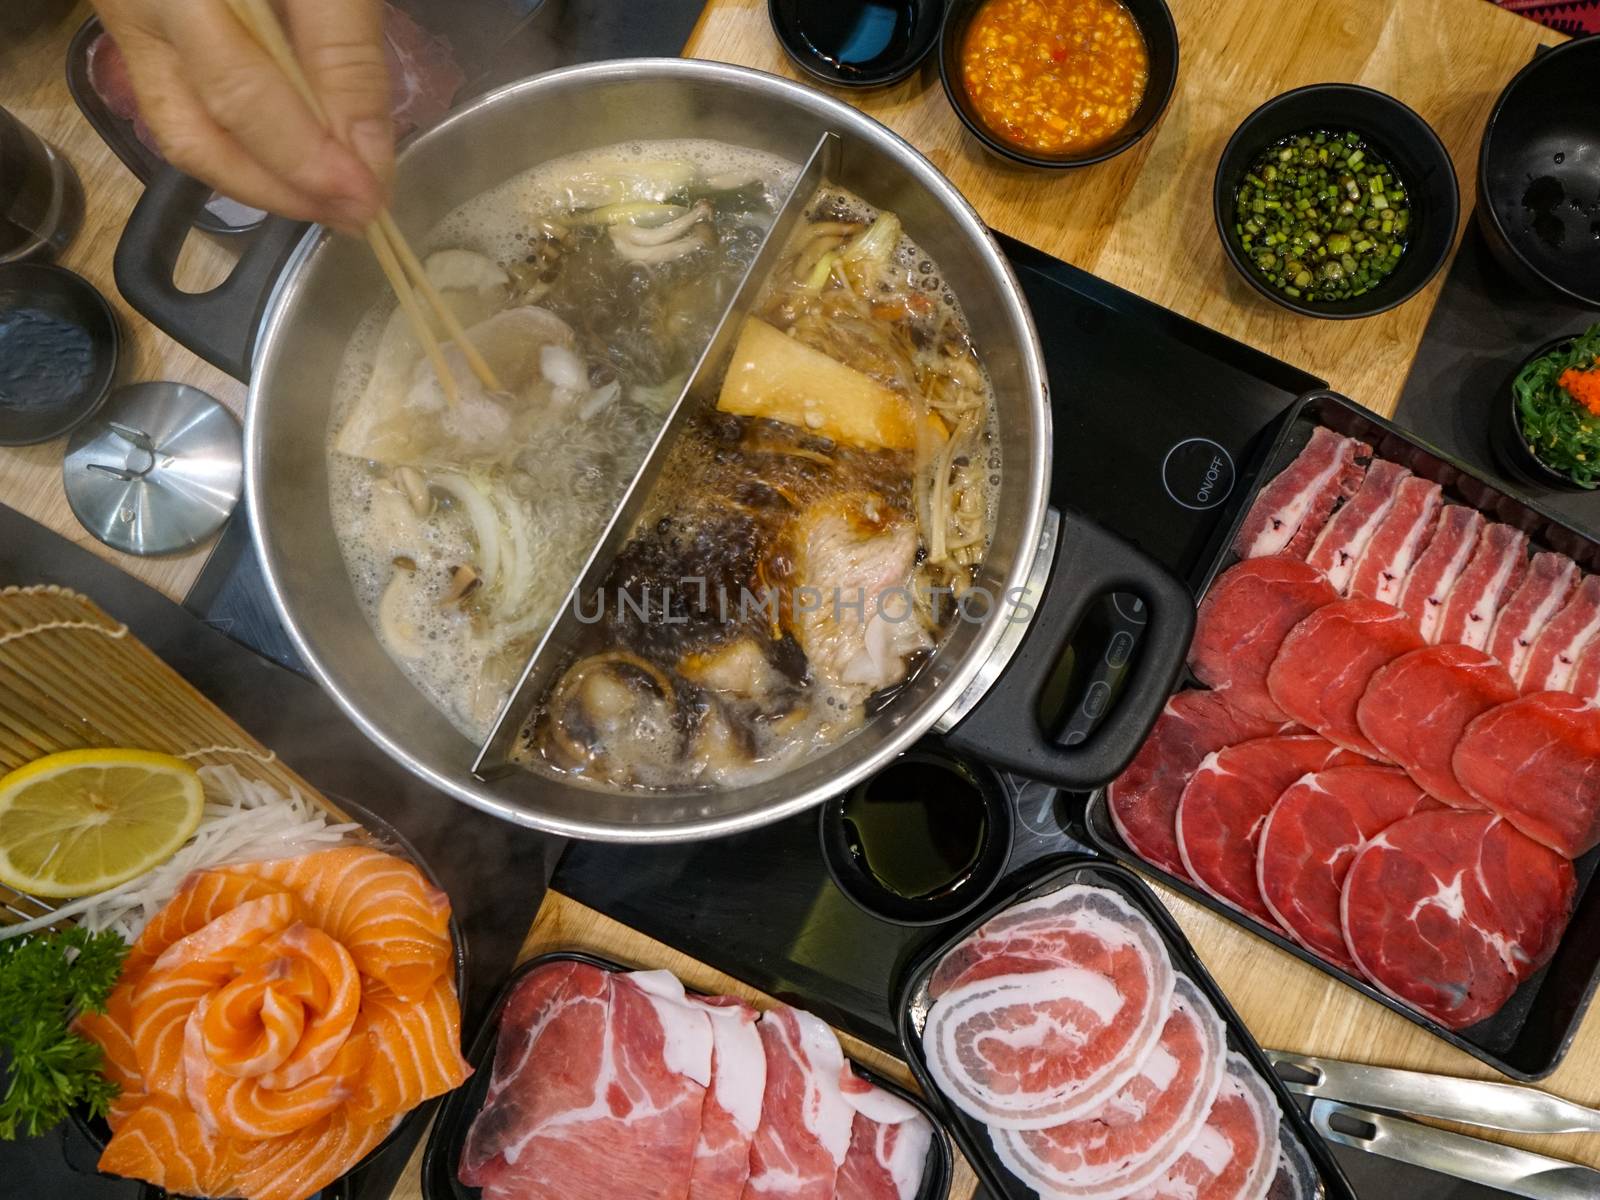 Shabu-Shabu a Japanese hotpot dish of thinly sliced meat and vegetables boiled in water.